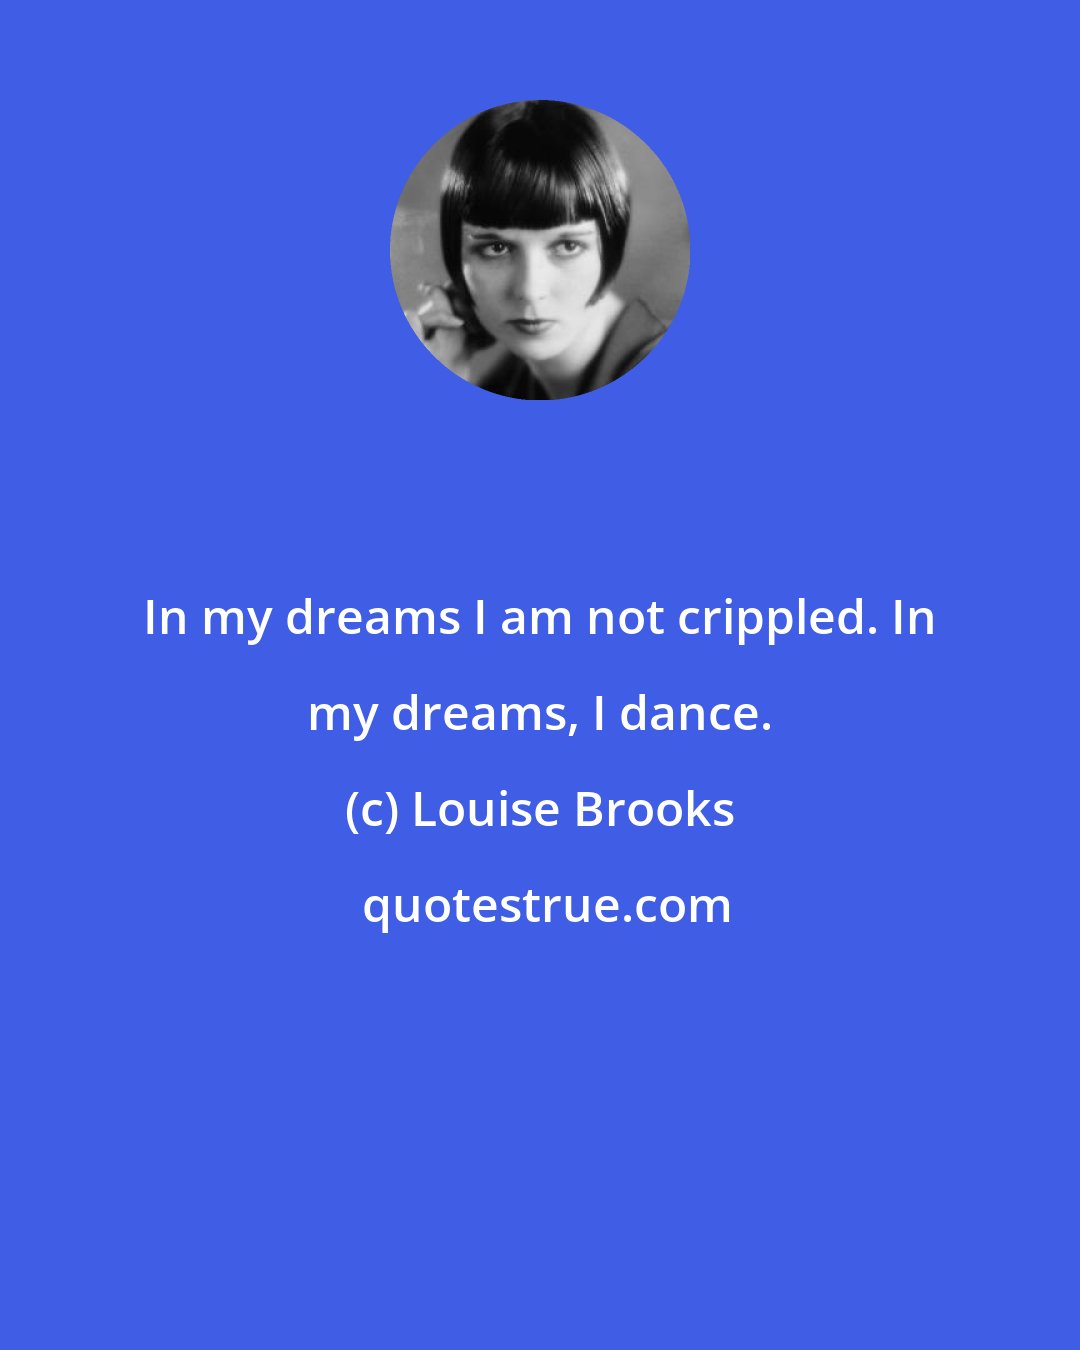 Louise Brooks: In my dreams I am not crippled. In my dreams, I dance.